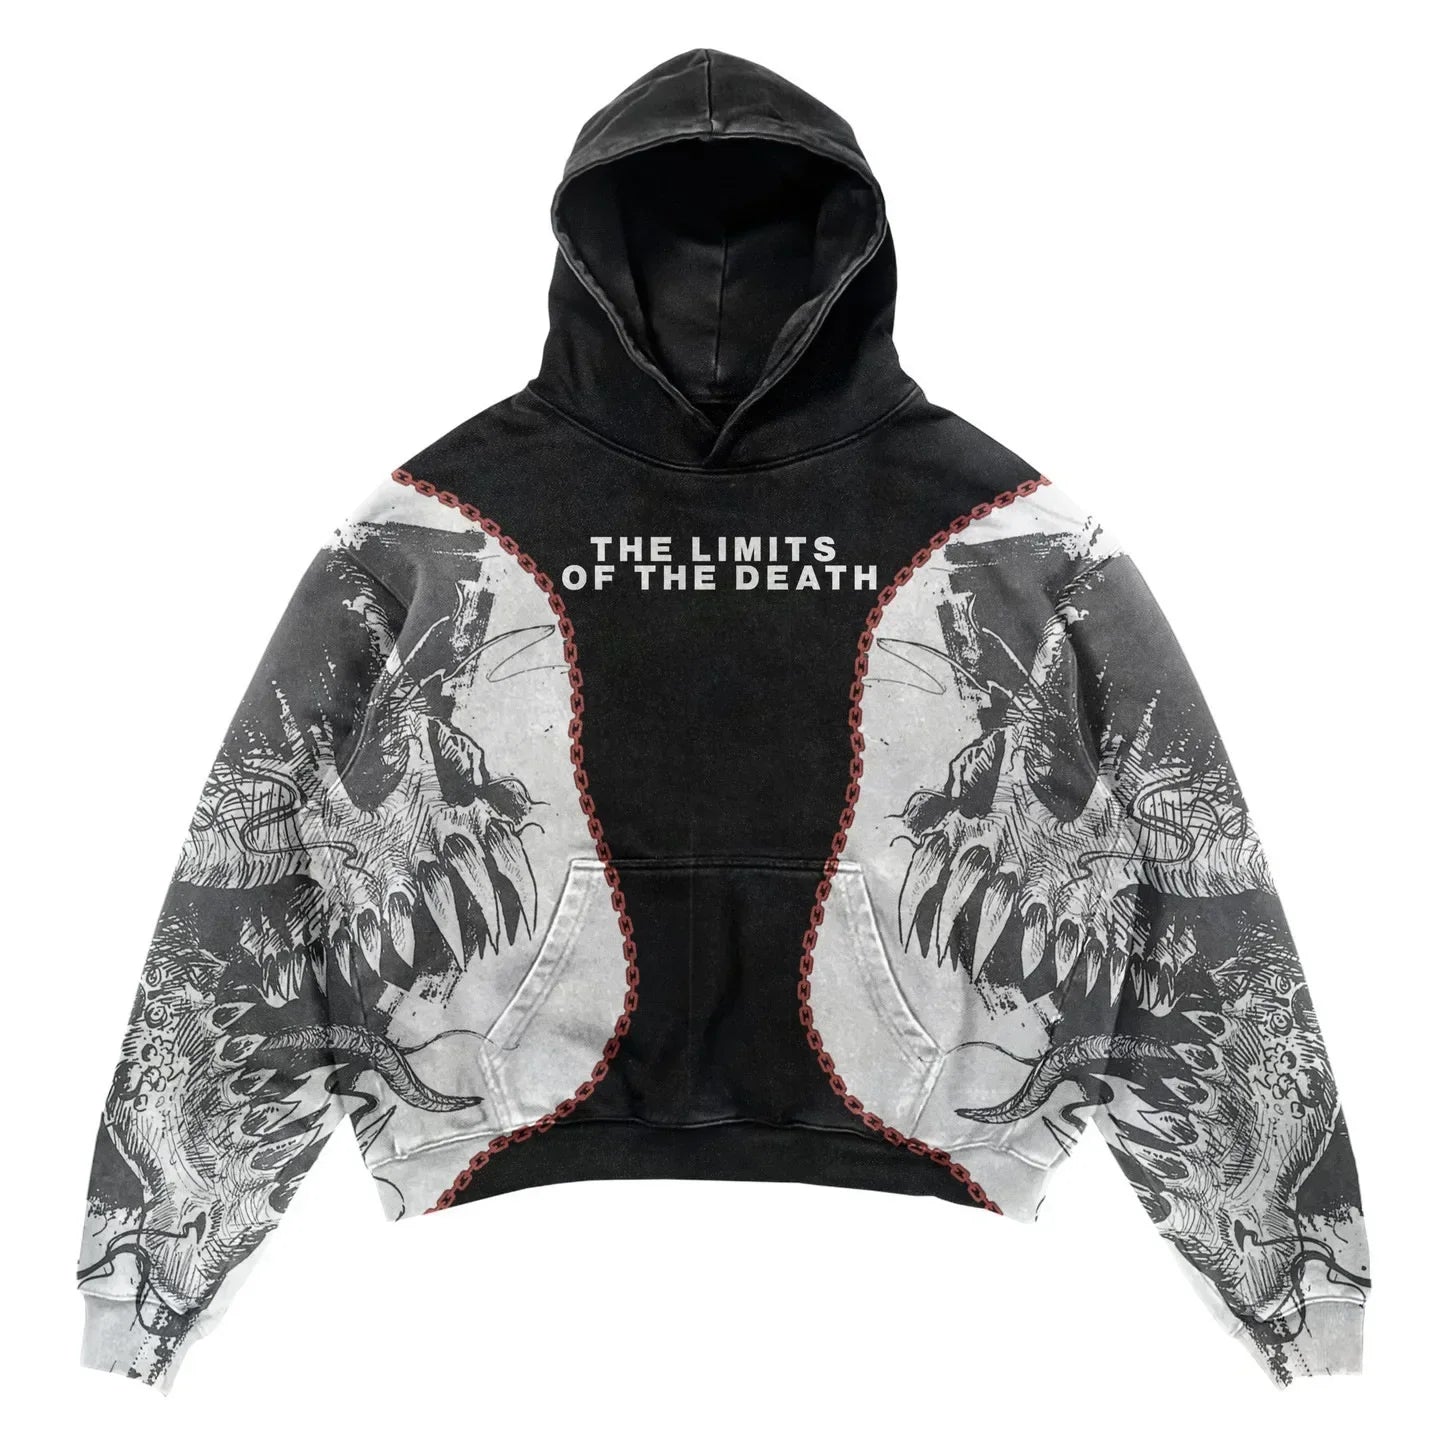 A Maramalive™ Explosions Printed Skull Y2K Retro Hooded Sweater Coat Street Style Gothic Casual Fashion Hooded Sweater Men's Female, displaying a punk style graphic design of skeletal imagery and red details, and the text "THE LIMITS OF THE DEATH" in white across the chest. Perfect for all Four Seasons.